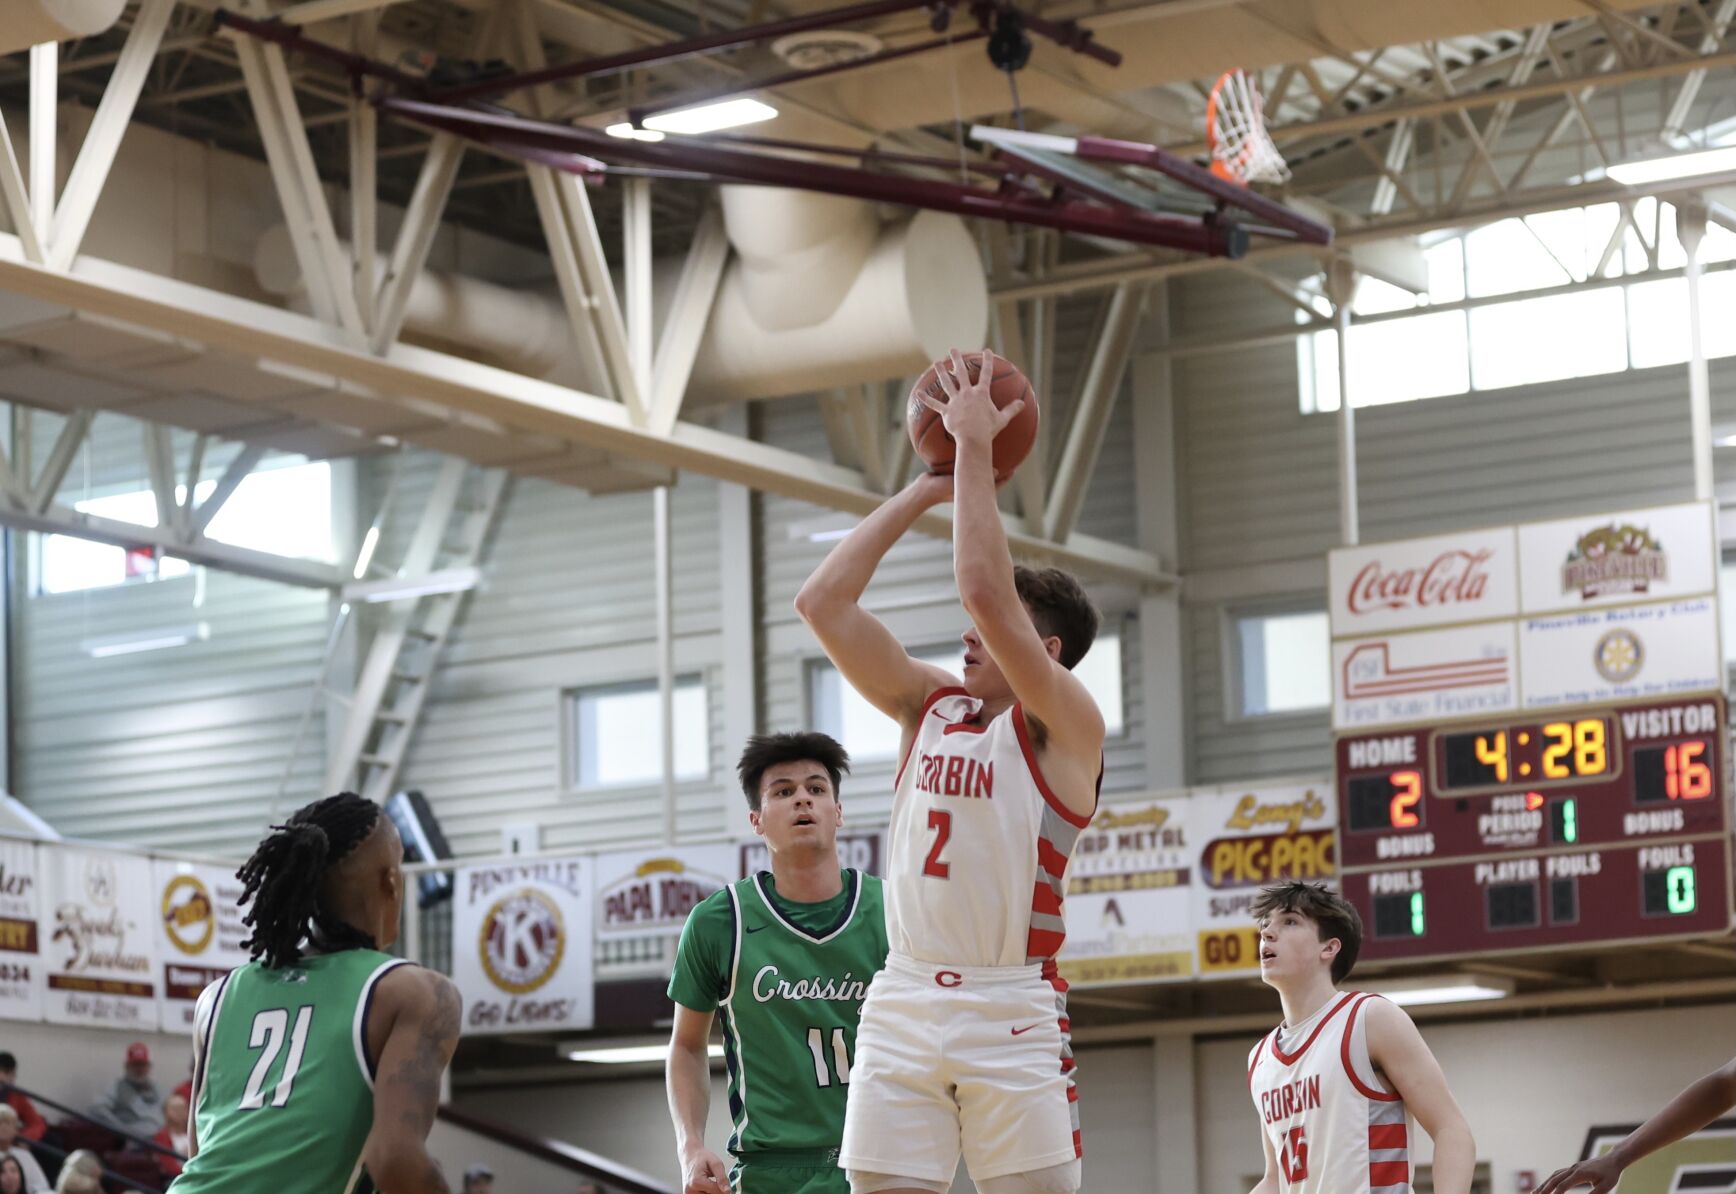 Redhounds suffer third straight loss, fall to No. 1 Great Crossing, 75-25